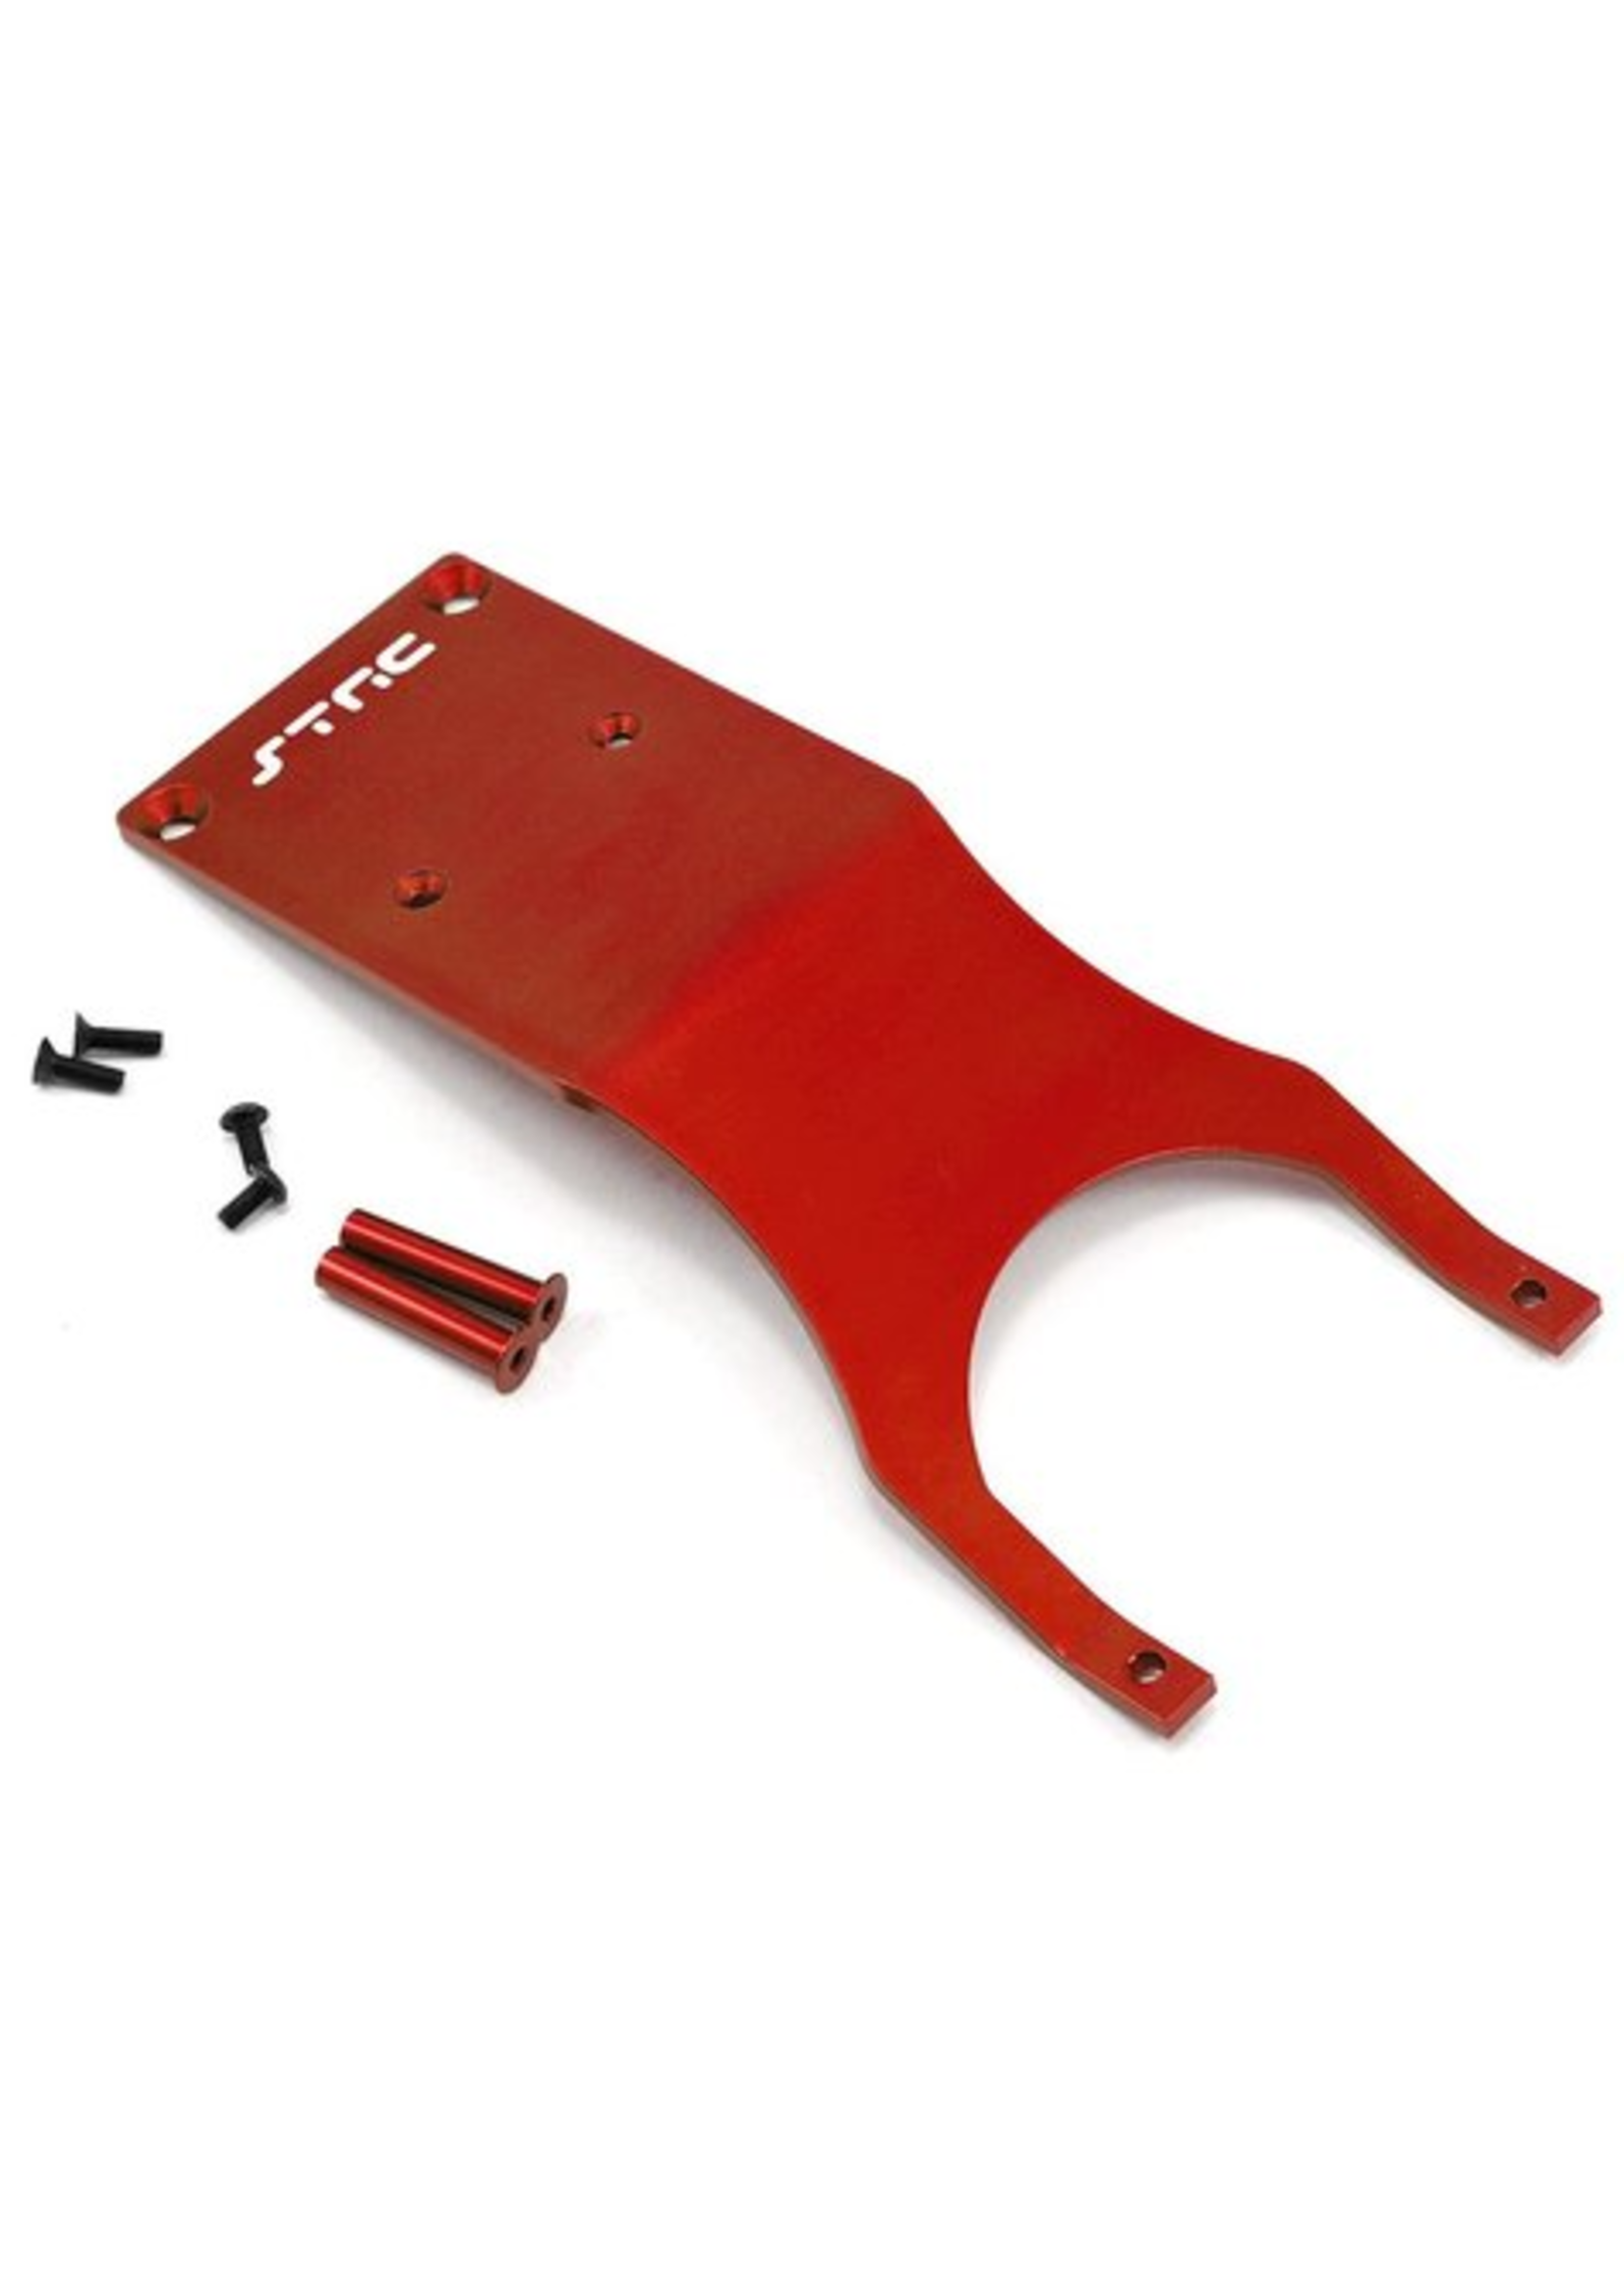 ST Racing Concepts SPTST5837R ST Racing Concepts CNC Machined Aluminum Front Skid Plate set (w/steering posts) for Traxxas Slash (Red)